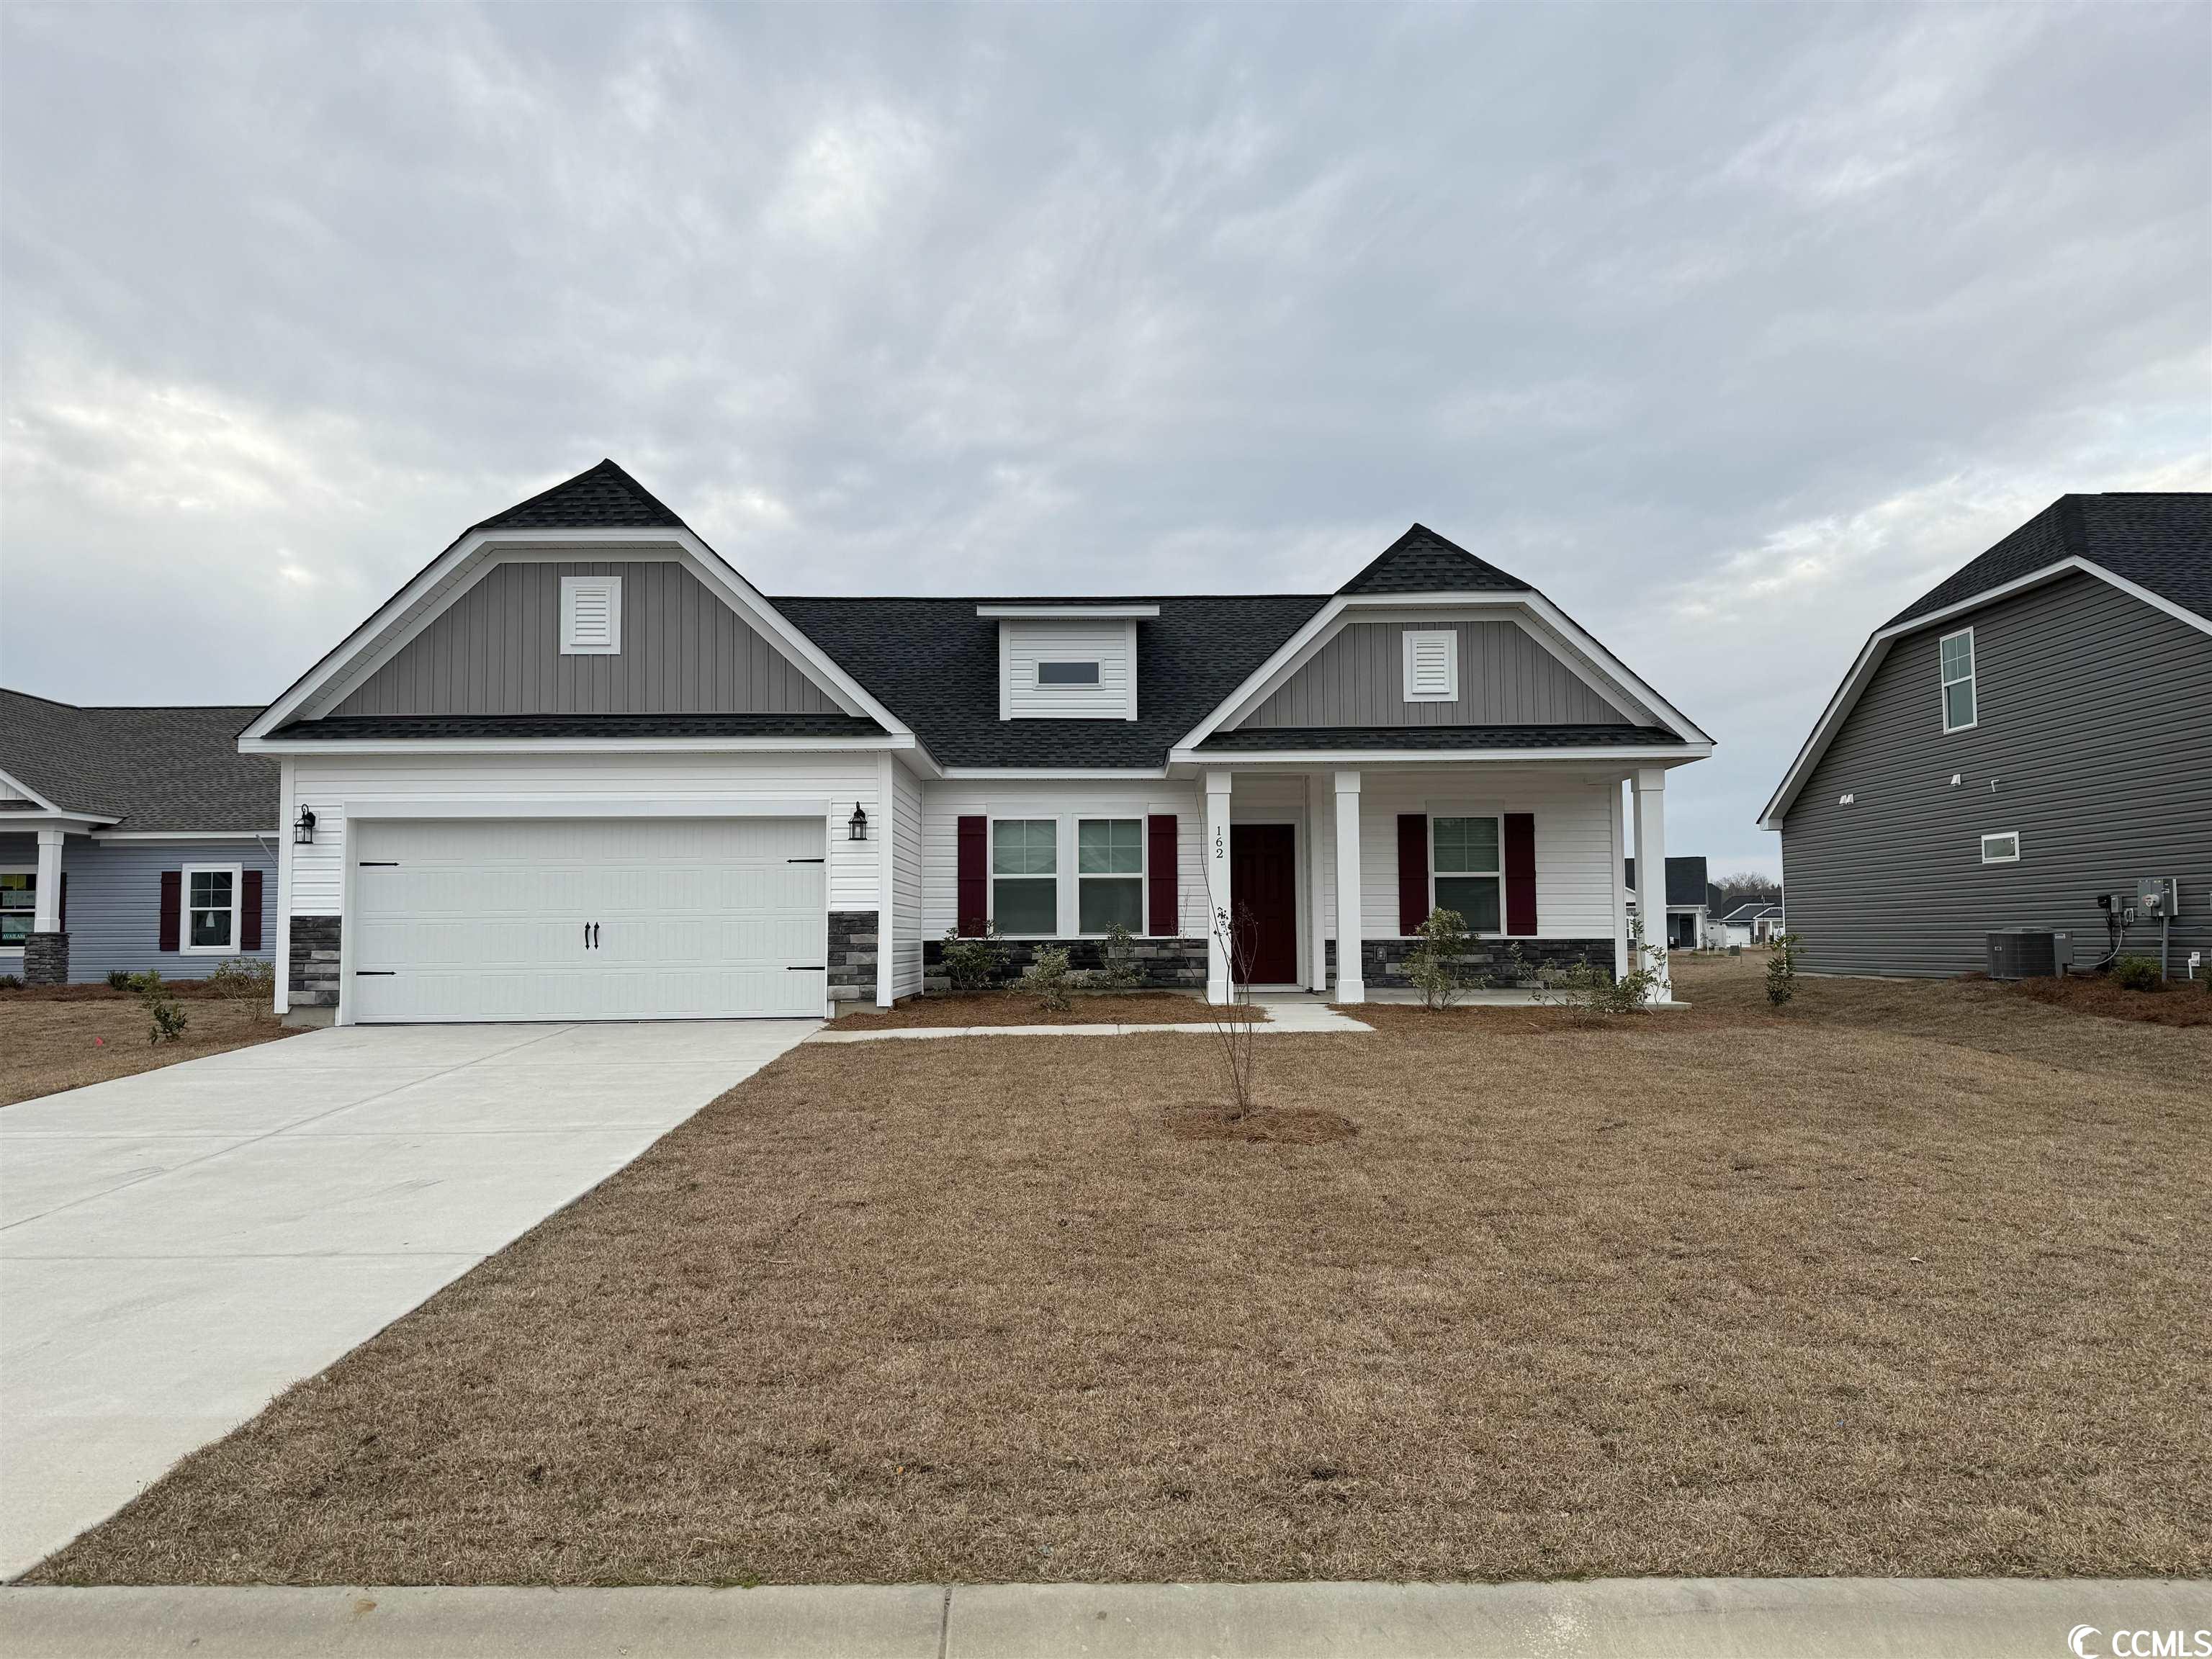 162 Grissett Lake Dr. Conway, SC 29526